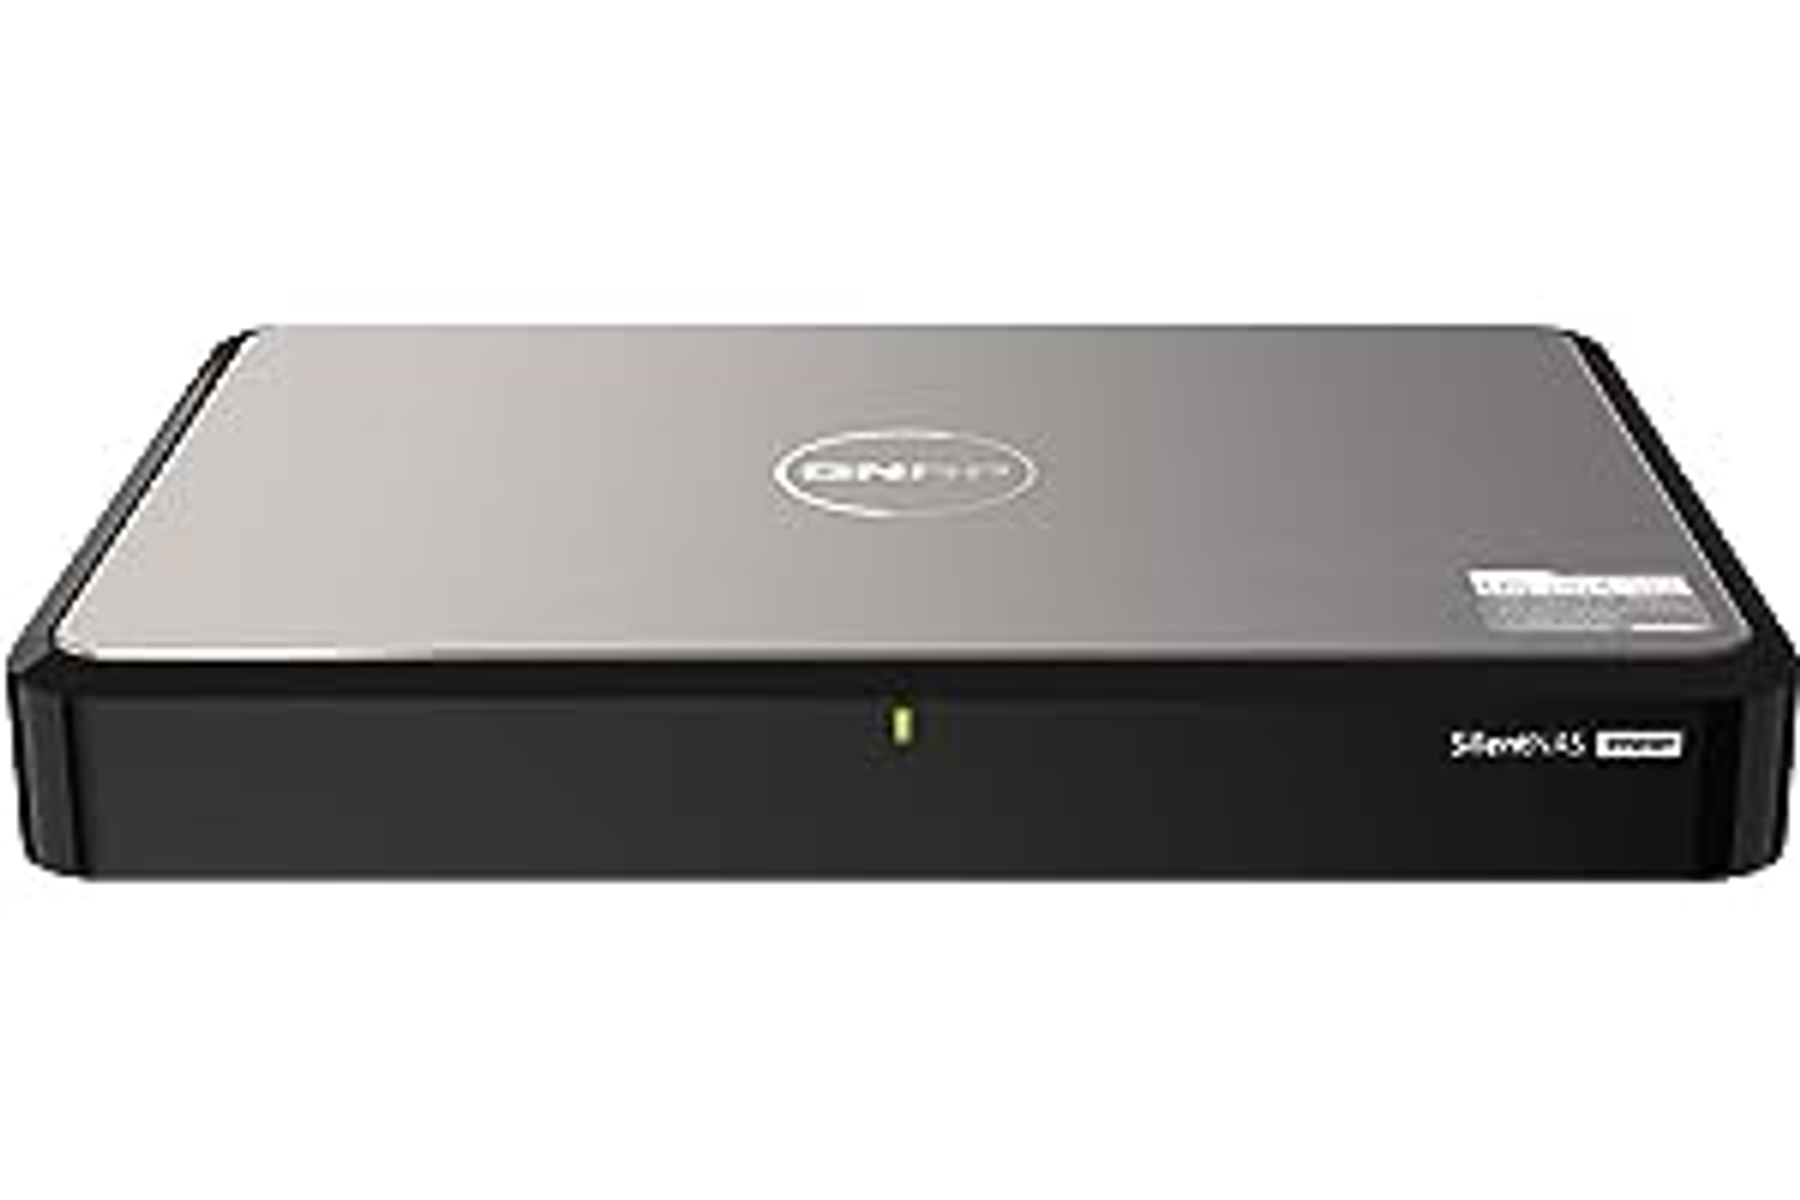 SYSTEMS QNAP HS-264-8G 0 3,5 TB Zoll